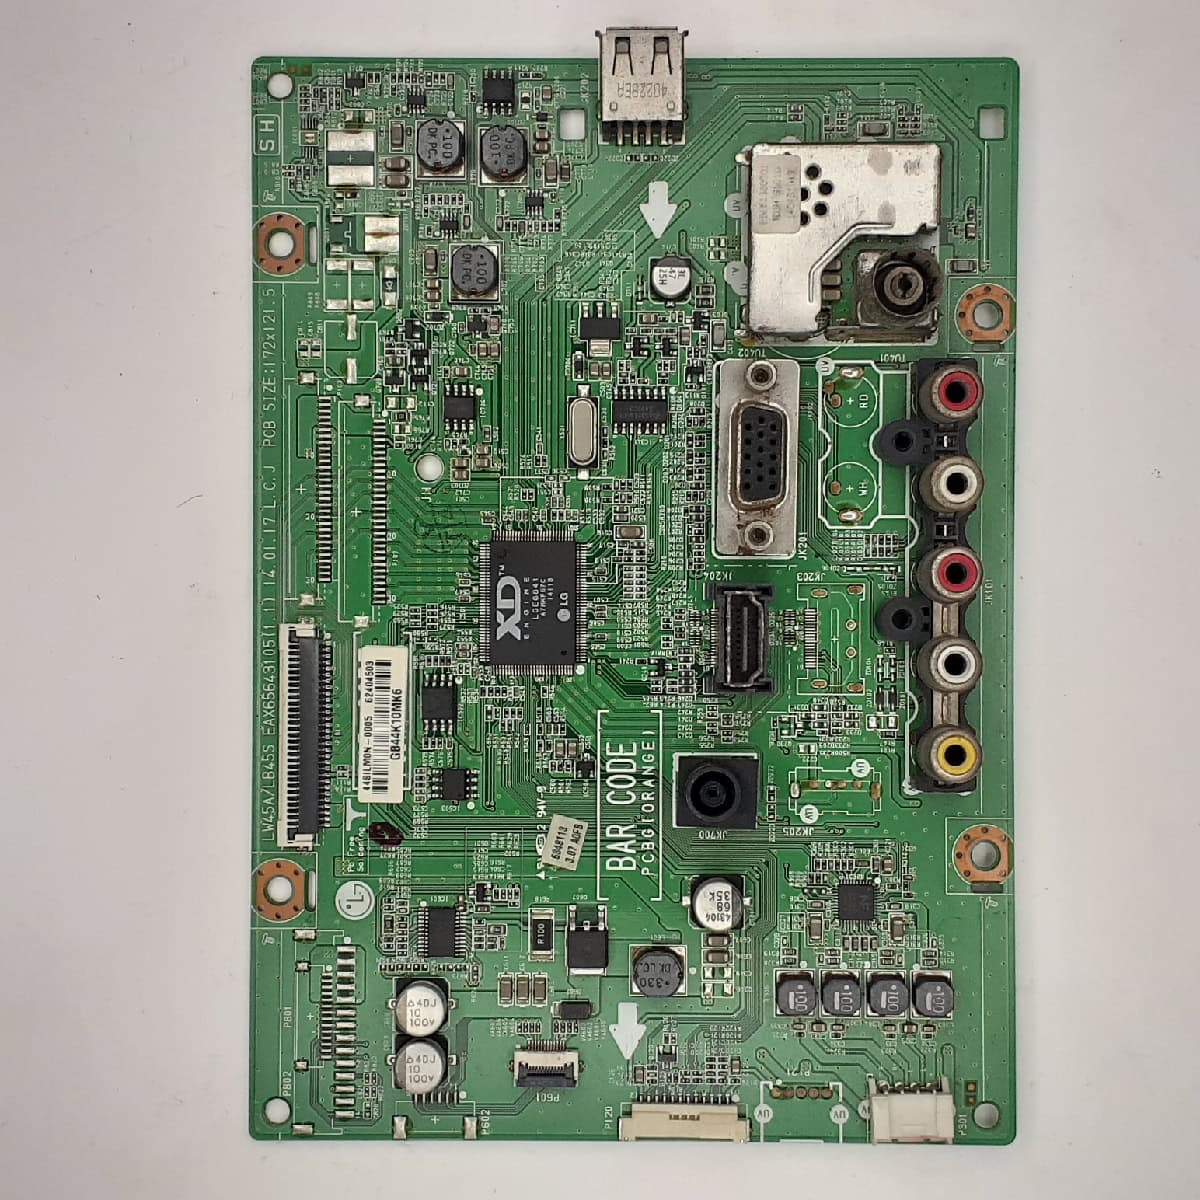 24MN48A LG MOTHERBOARD FOR LED TV